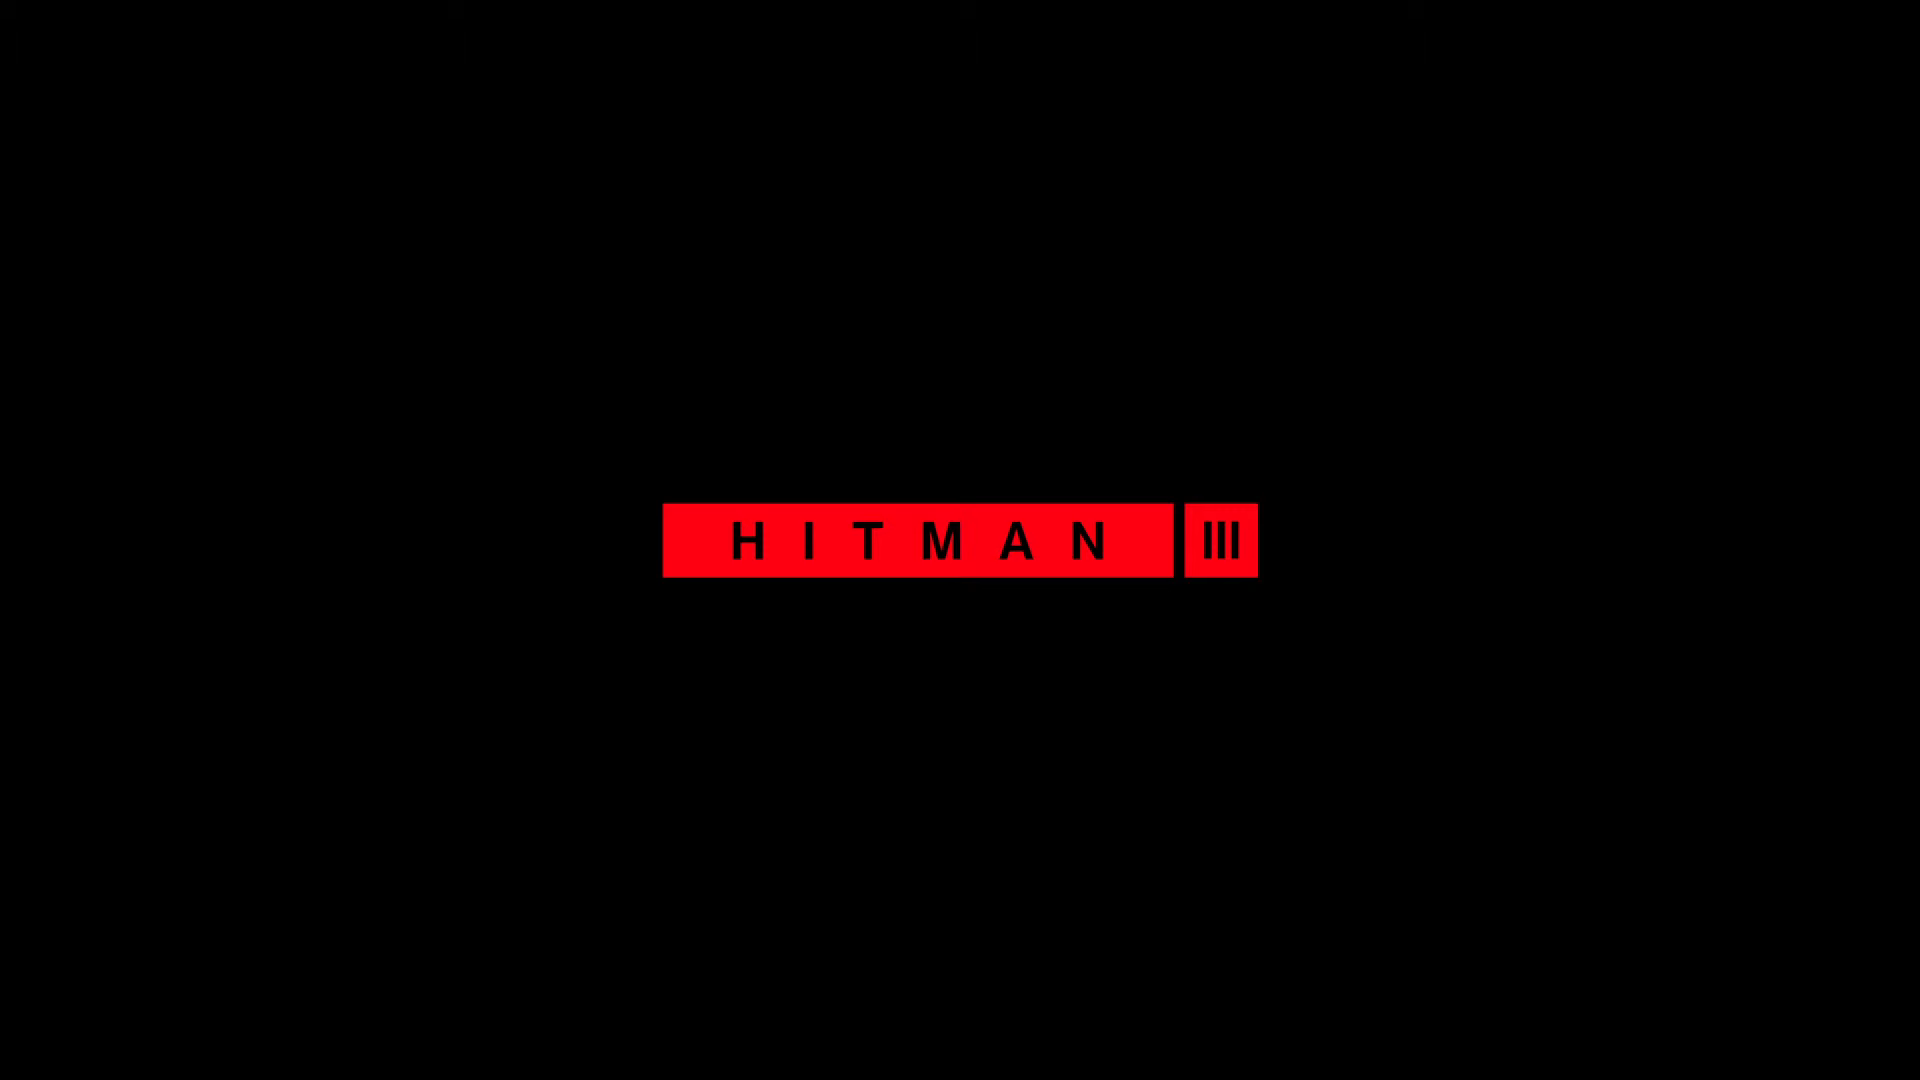 Hitman 3 announced for PS coming January 2021